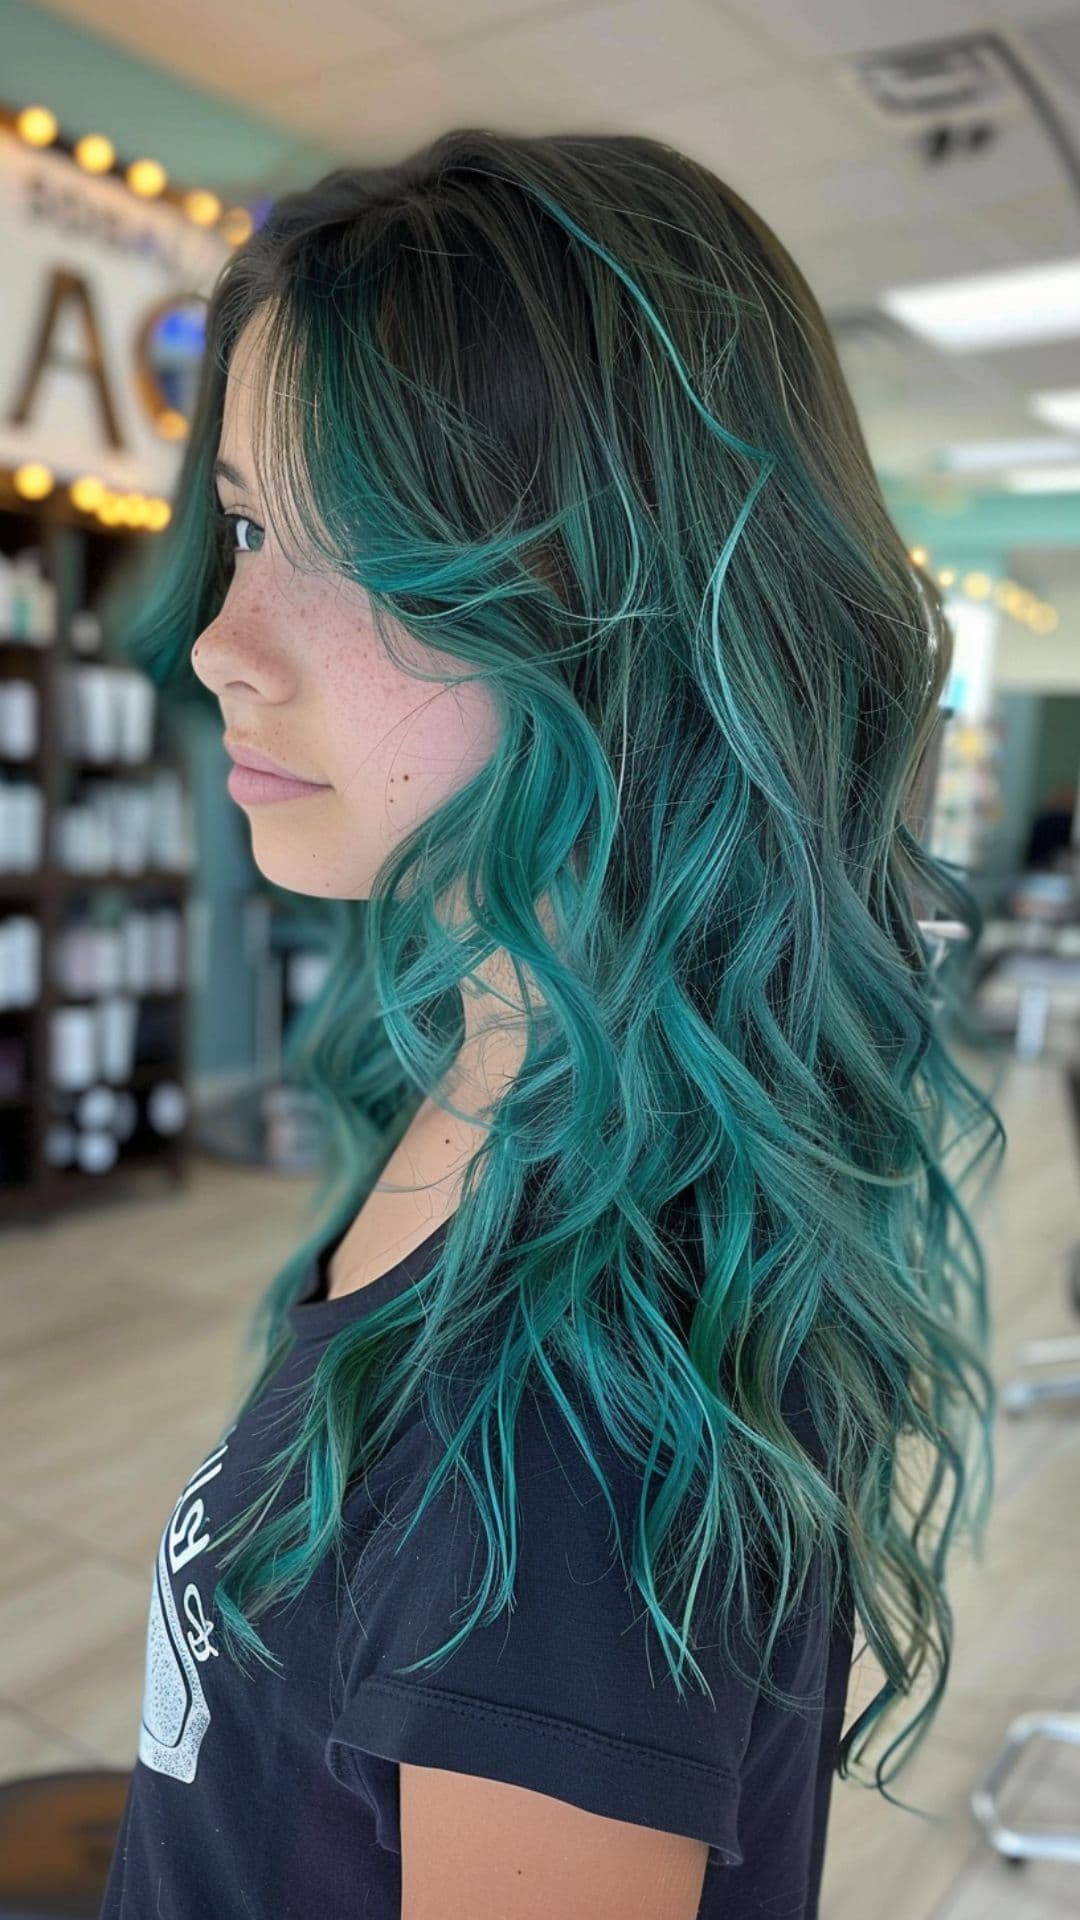 A young woman modelling a teal hair.